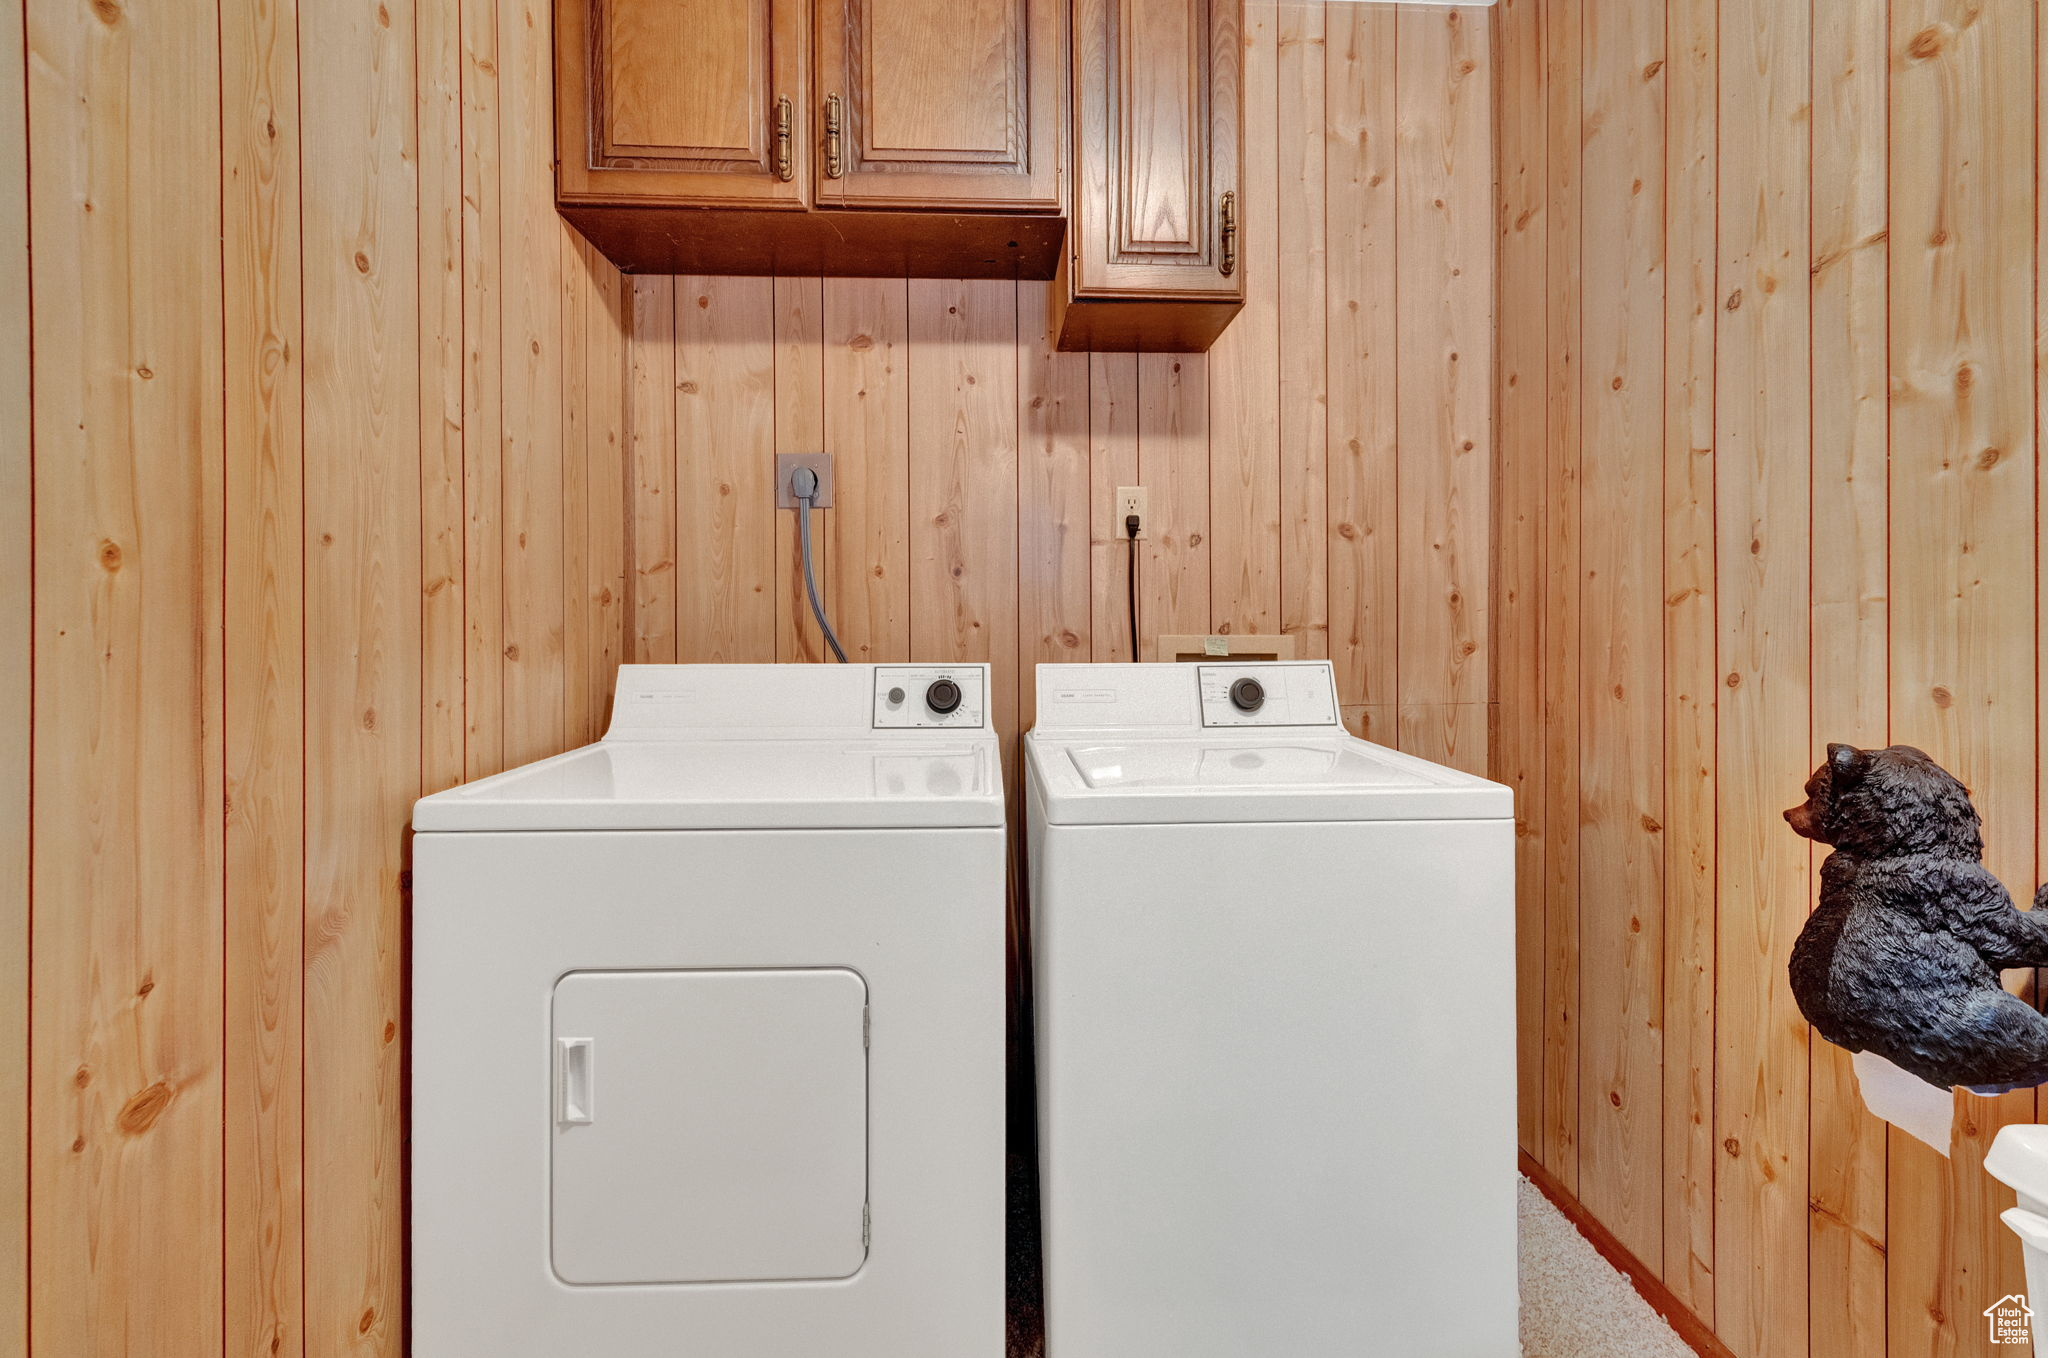 Clothes washing area with cabinets, washing machine and dryer, and wooden walls